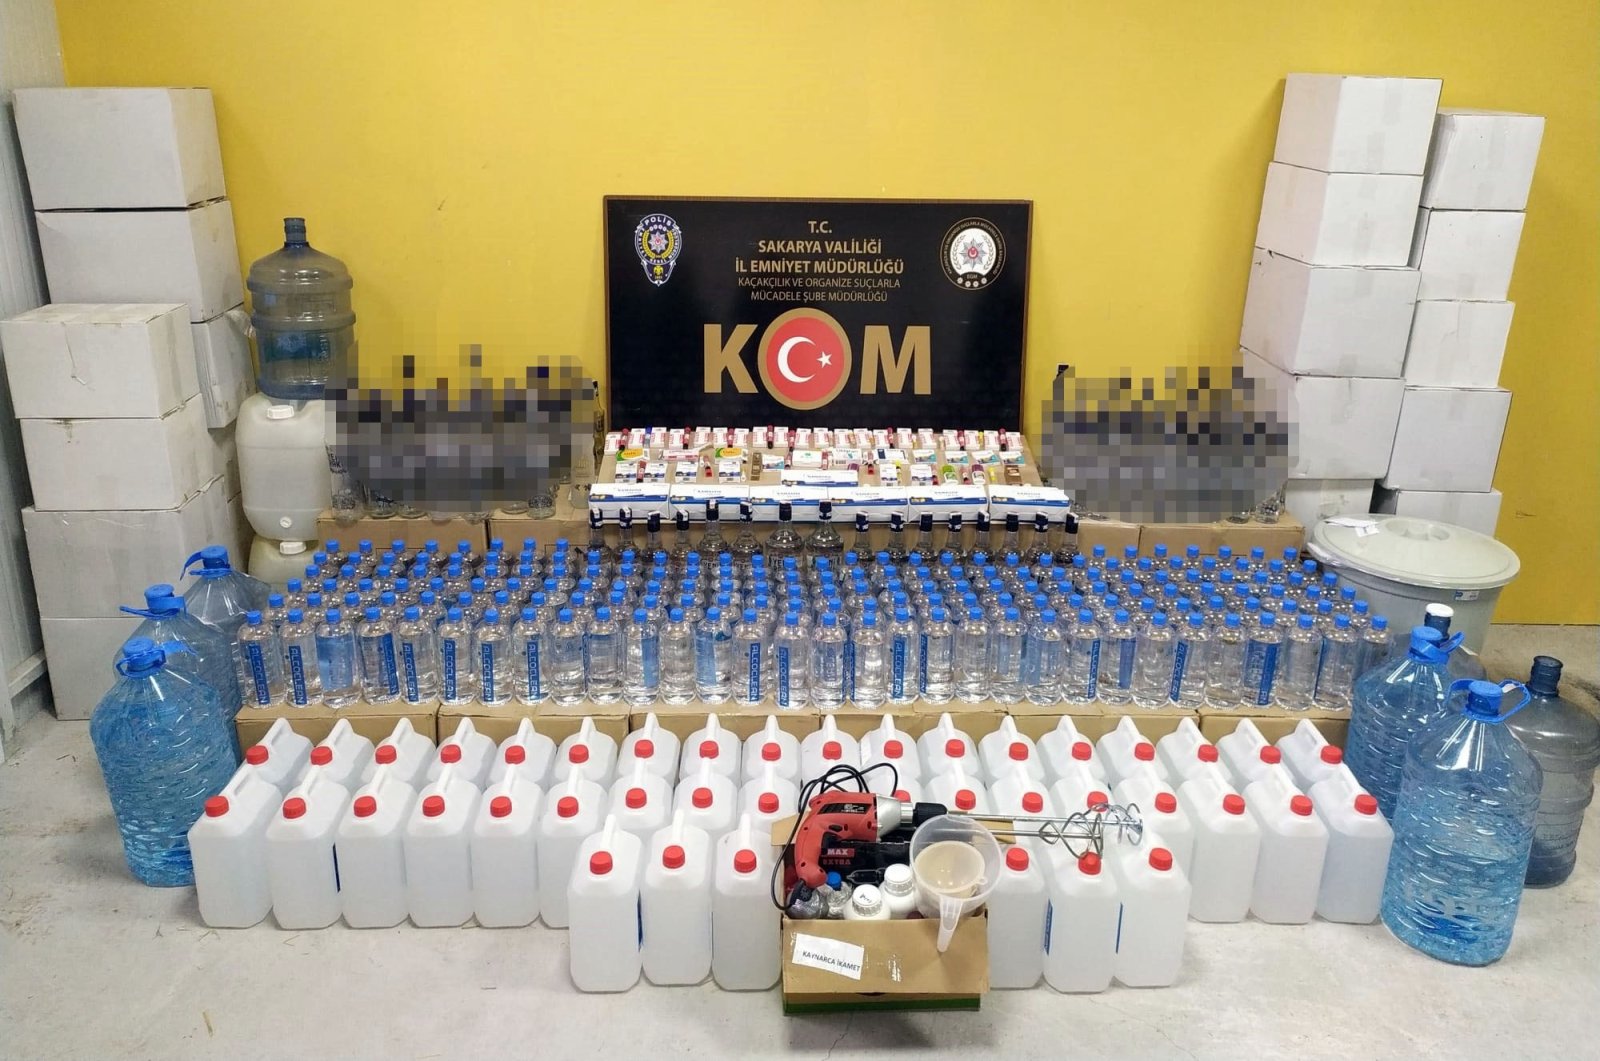 Police in northwestern Sakarya province exhibit gallons containing ethyl alcohol, empty bottles and other equipment used in bootleg liquor production, Turkey, Dec. 22, 2021. (IHA Photo)